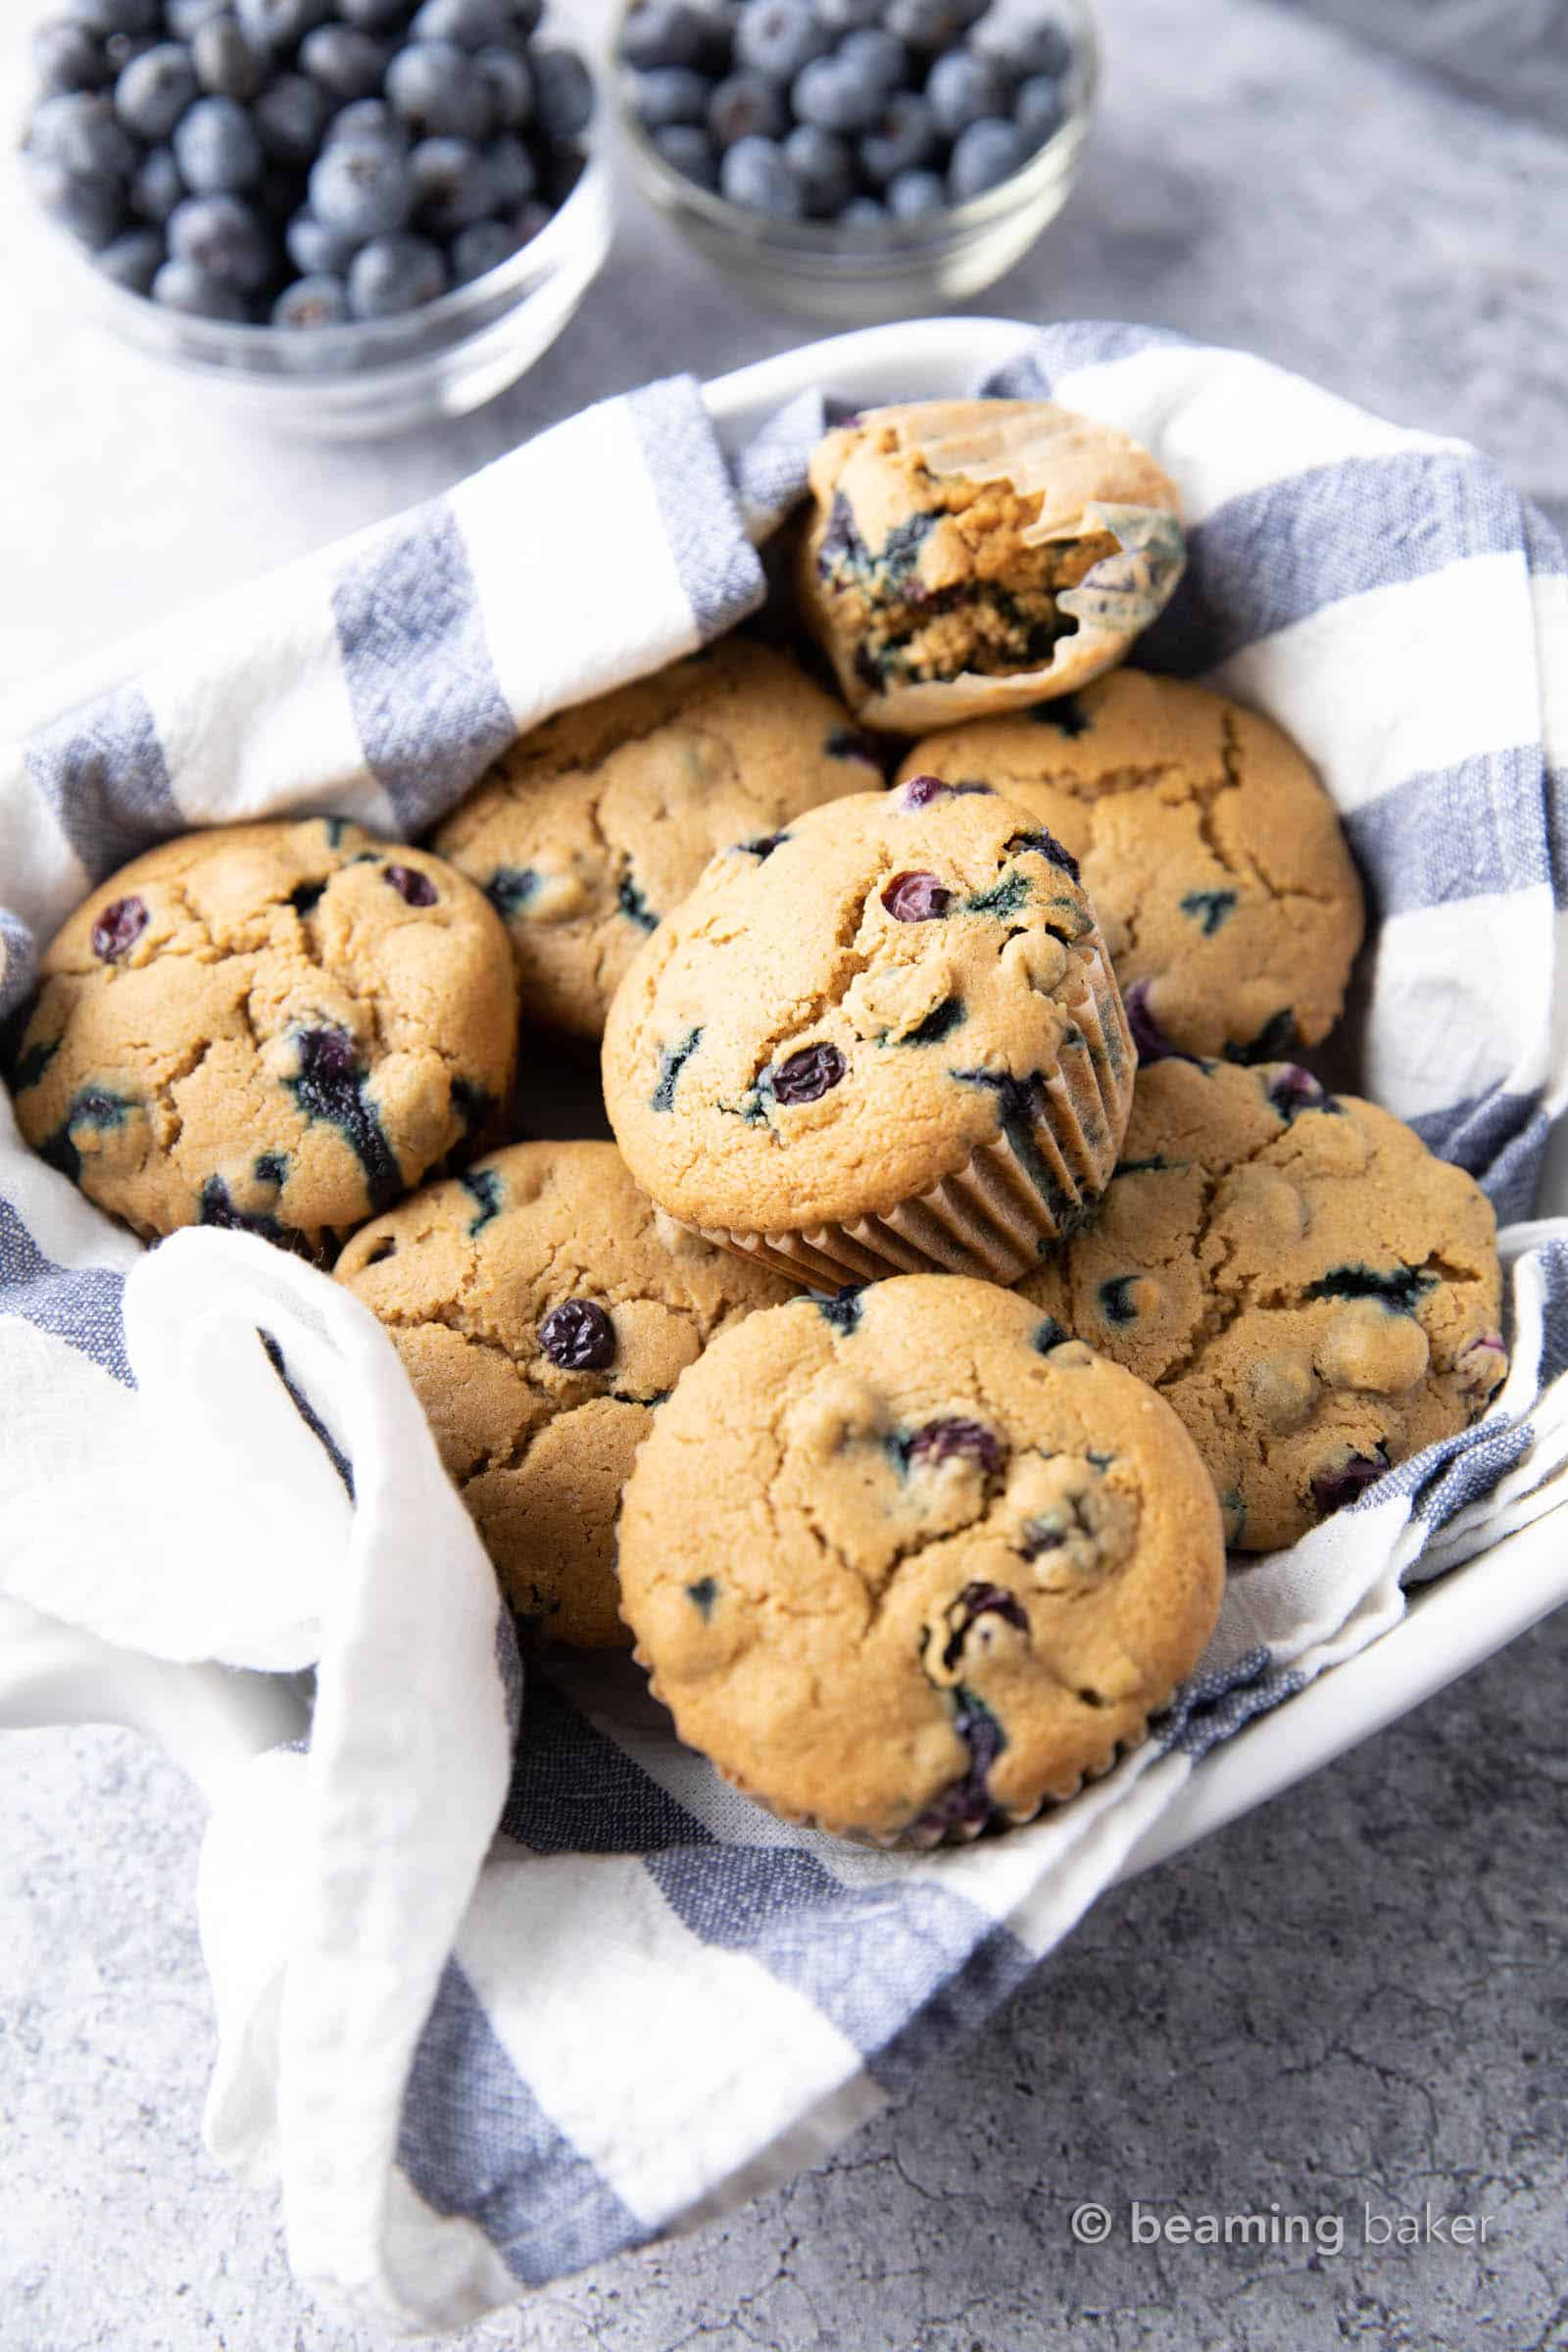 Gluten Free Blueberry Muffins Recipe (Easy!): this GF blueberry muffins recipe creates moist, tender muffins with a delicious, crispy top and fluffy crumb, bursting with blueberries! Vegan, Dairy-Free, Healthy Ingredients. #GlutenFree #GlutenFreeMuffins #Blueberry #Breakfast | Recipe at BeamingBaker.com